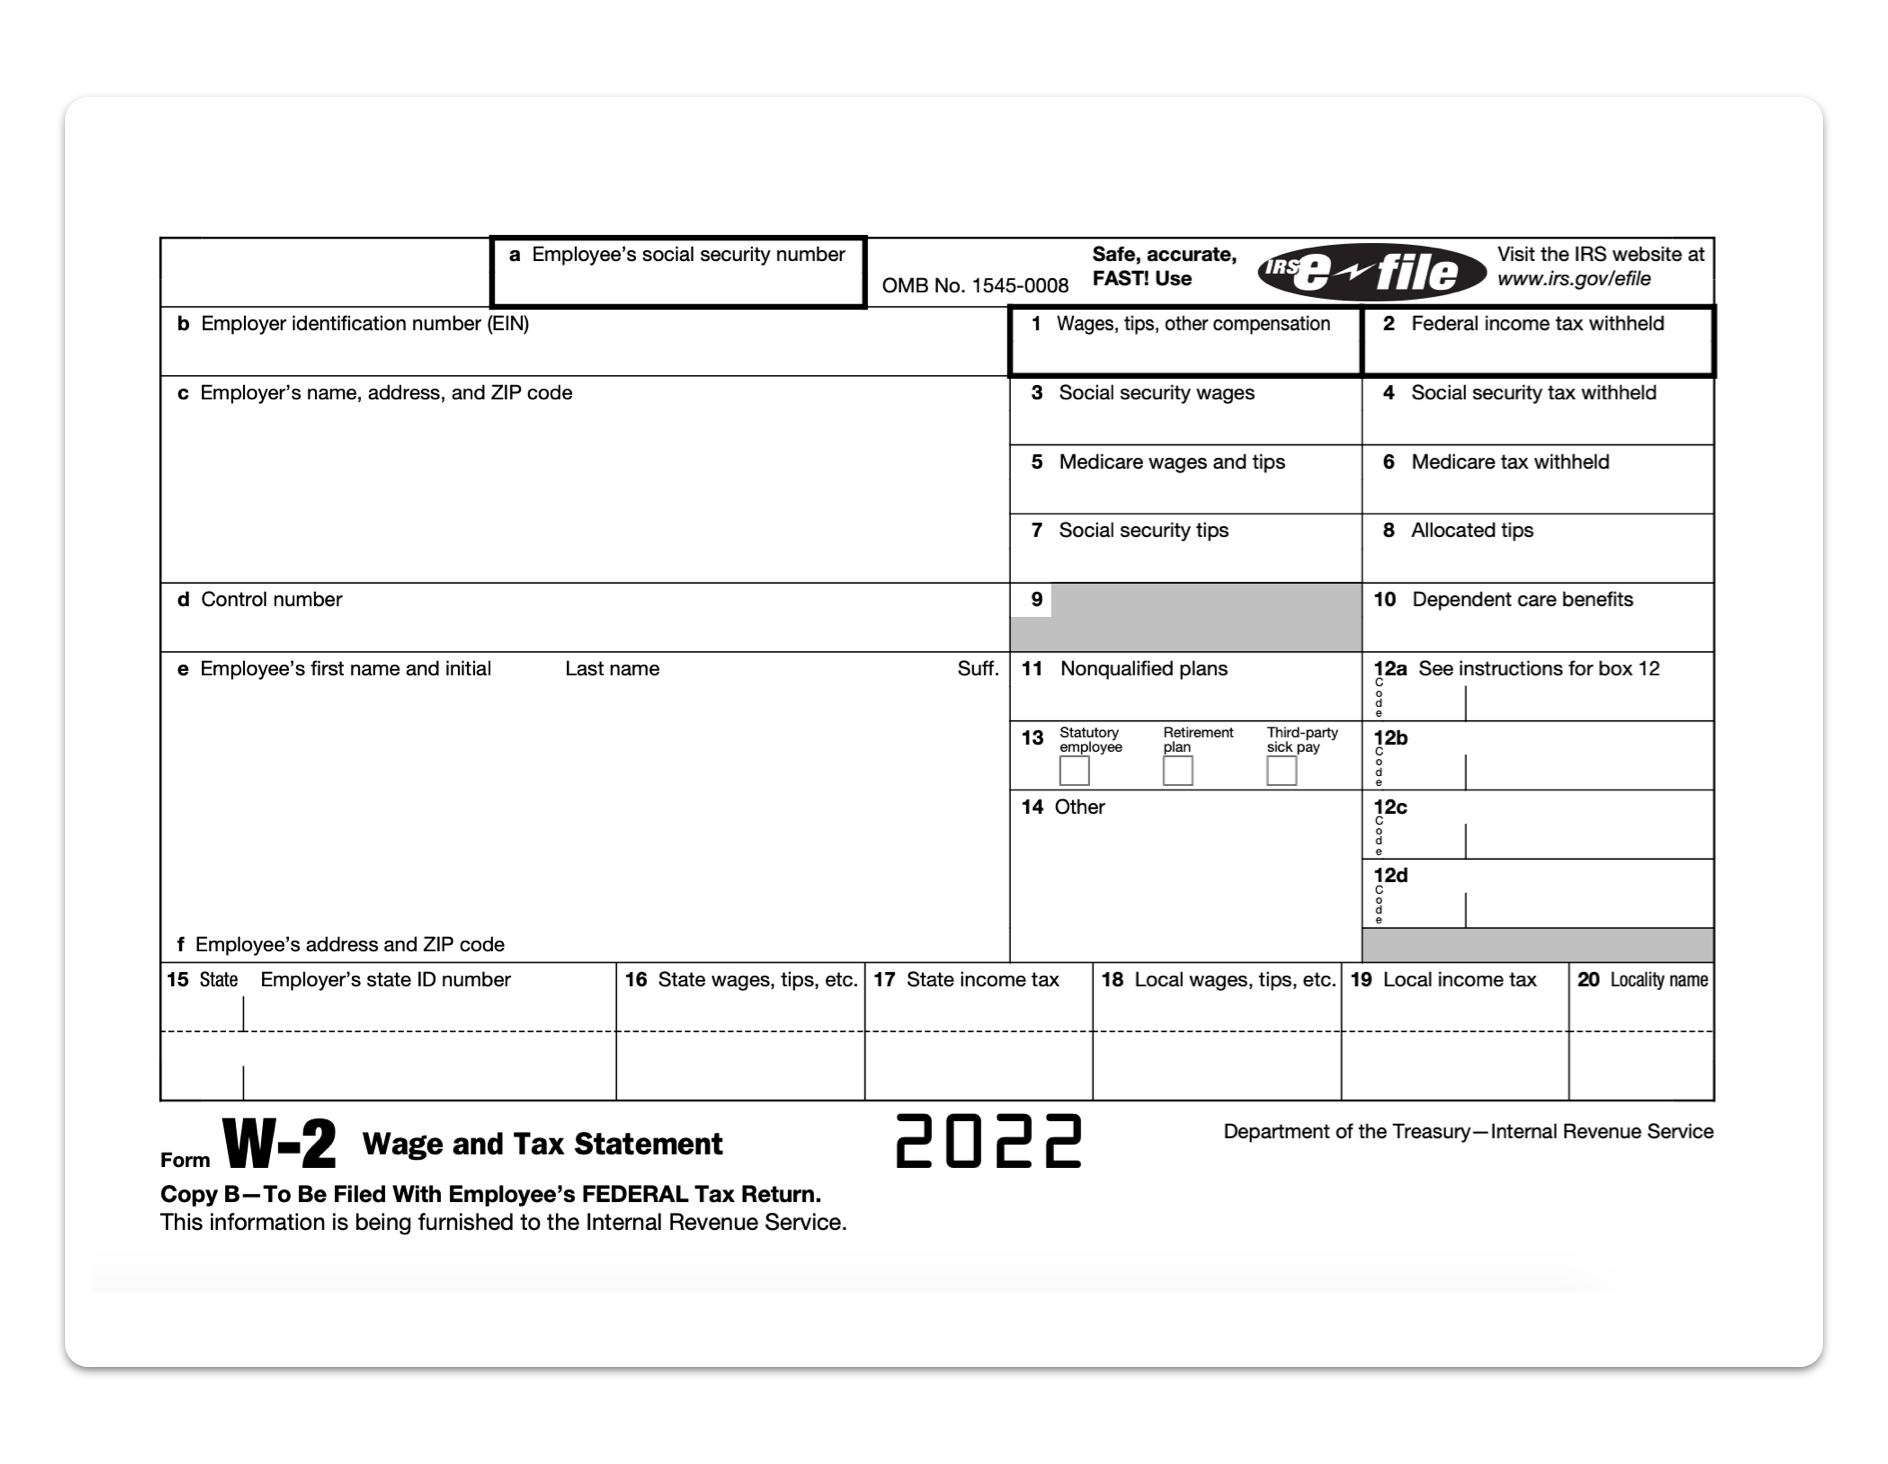 Your Guide To The W-2 Form: Wage And Tax Statement - Hourly, Inc. pertaining to Irs E File W2 Forms